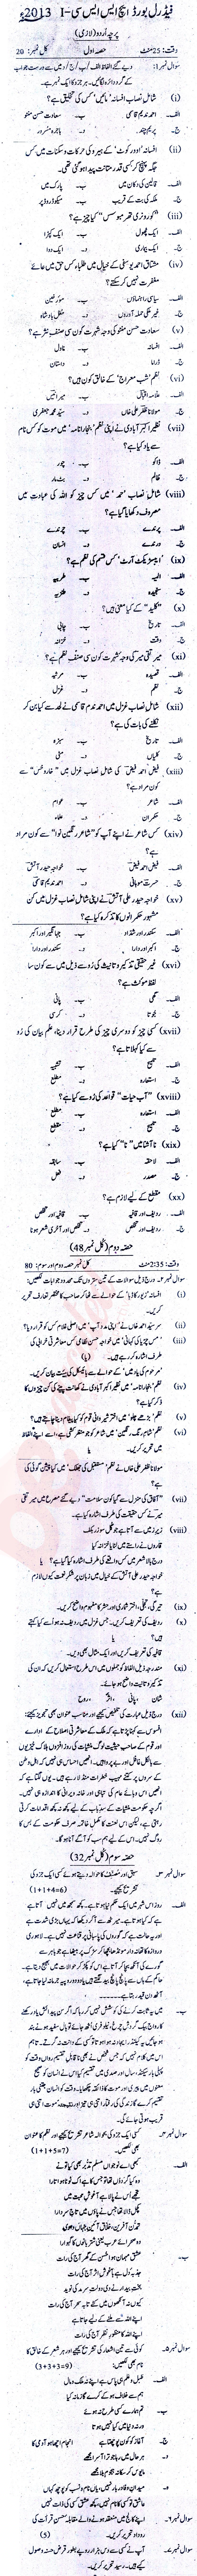 Urdu 11th class Past Paper Group 1 Federal BISE  2013